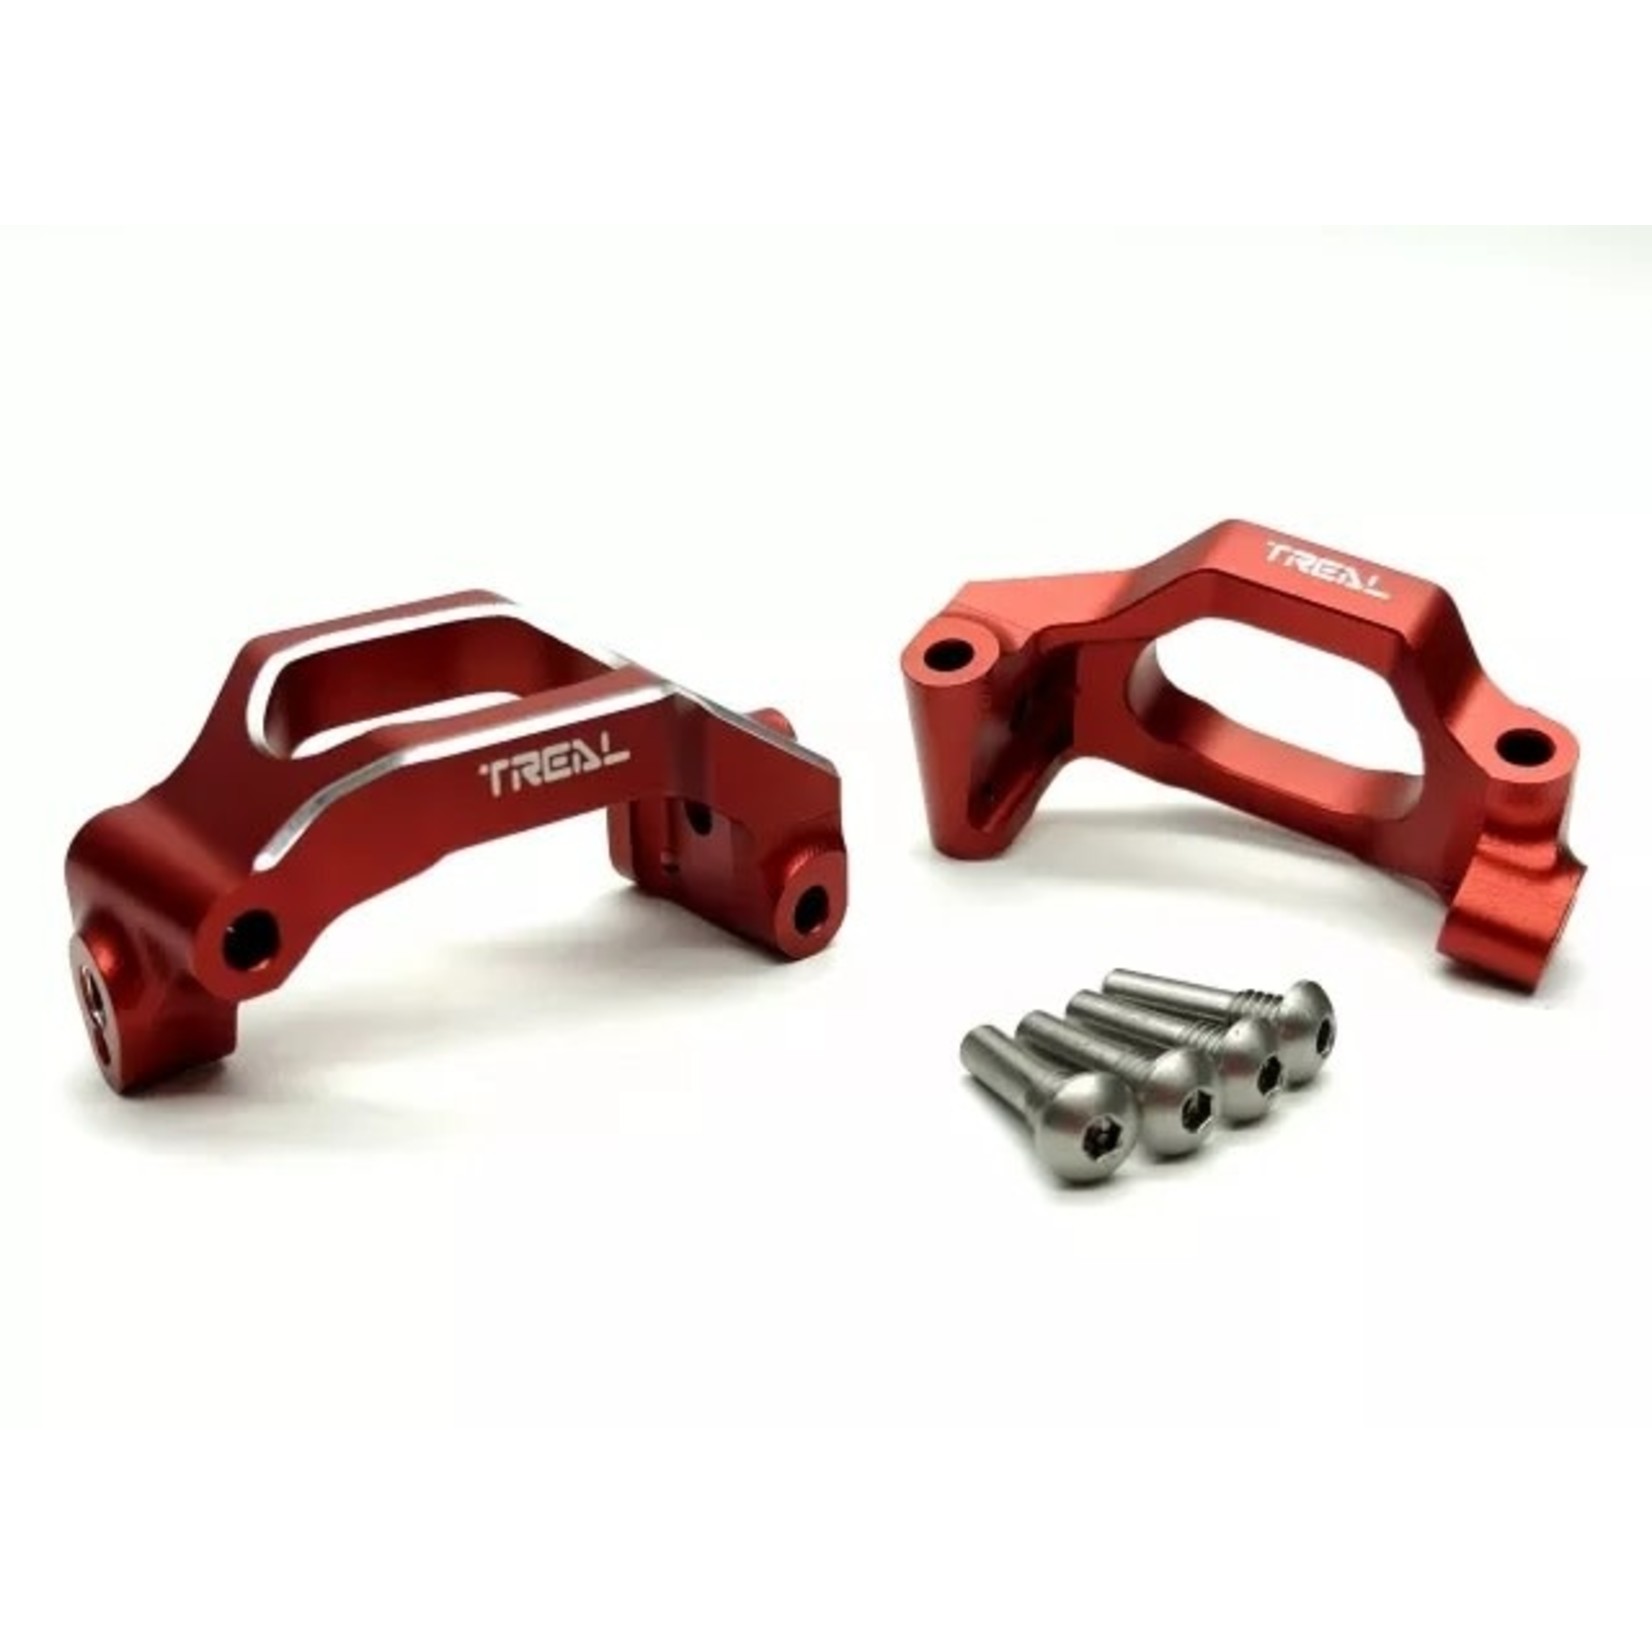 Treal Treal Traxxas Maxx Aluminum Front C-Hub Carriers (Red) #X002OD7S7F